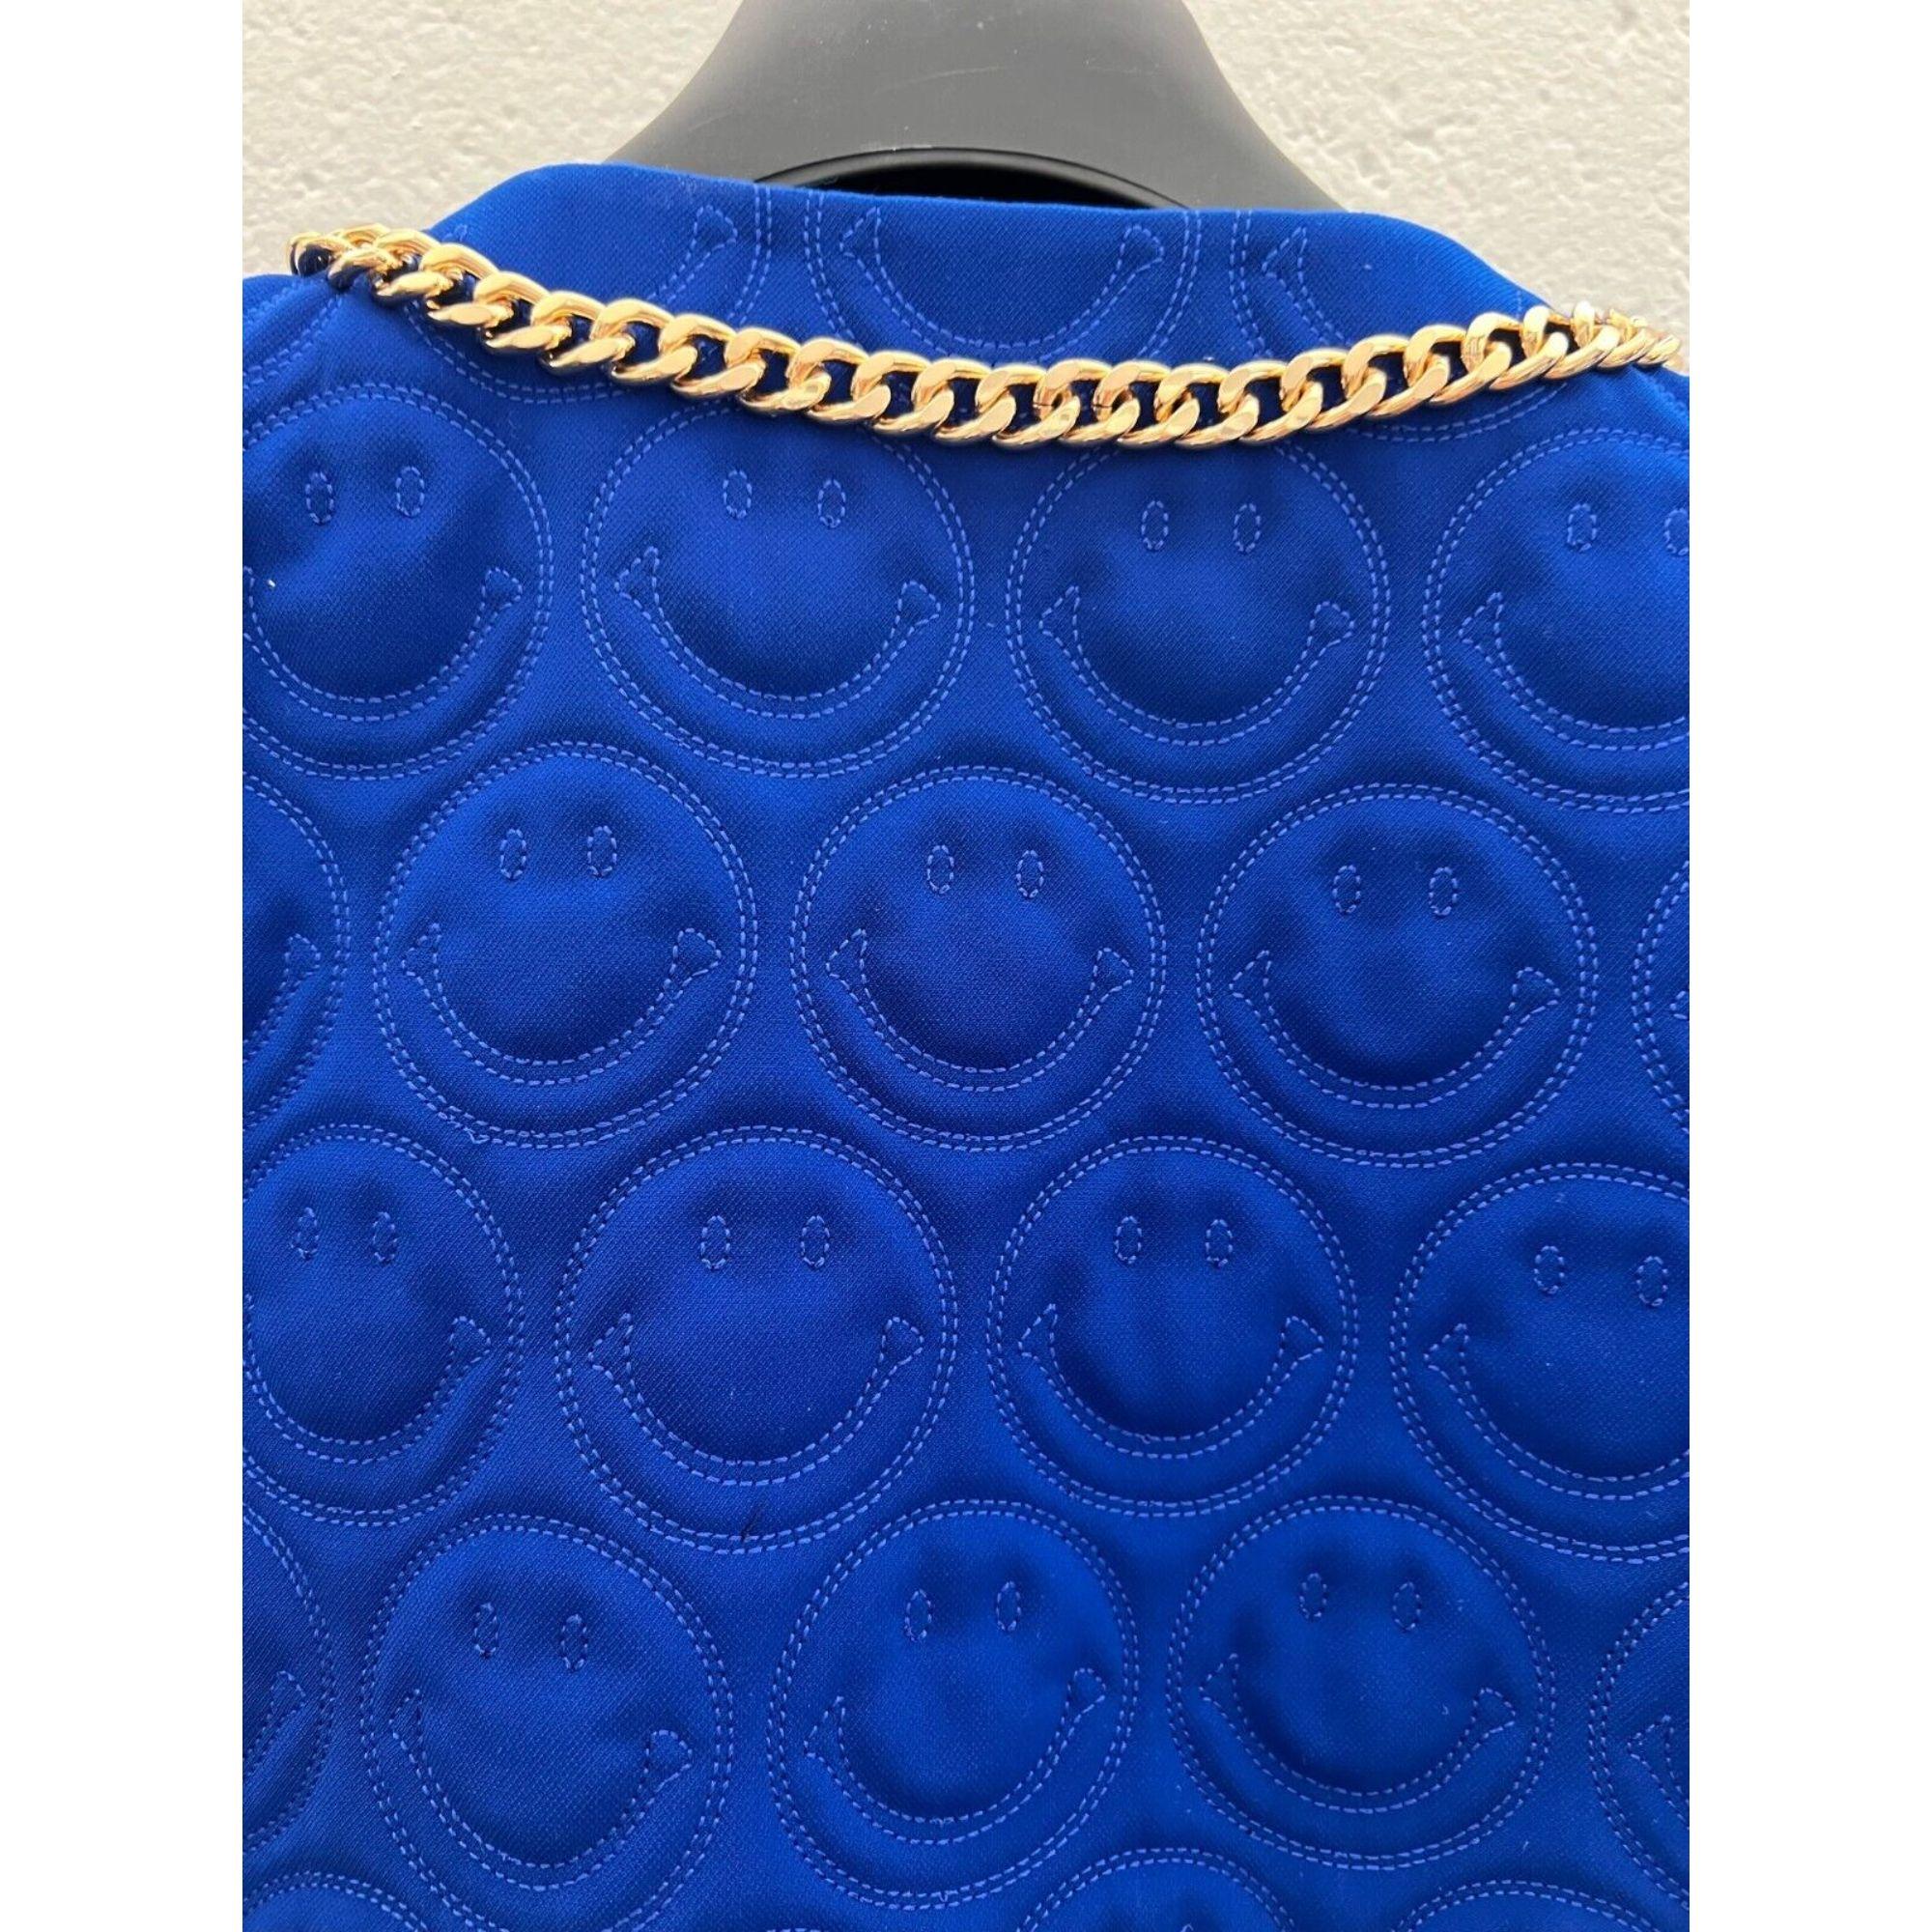 SS21 Moschino Couture BlueBlazer Smiley Face by Jeremy Scott, Size US 10 For Sale 3